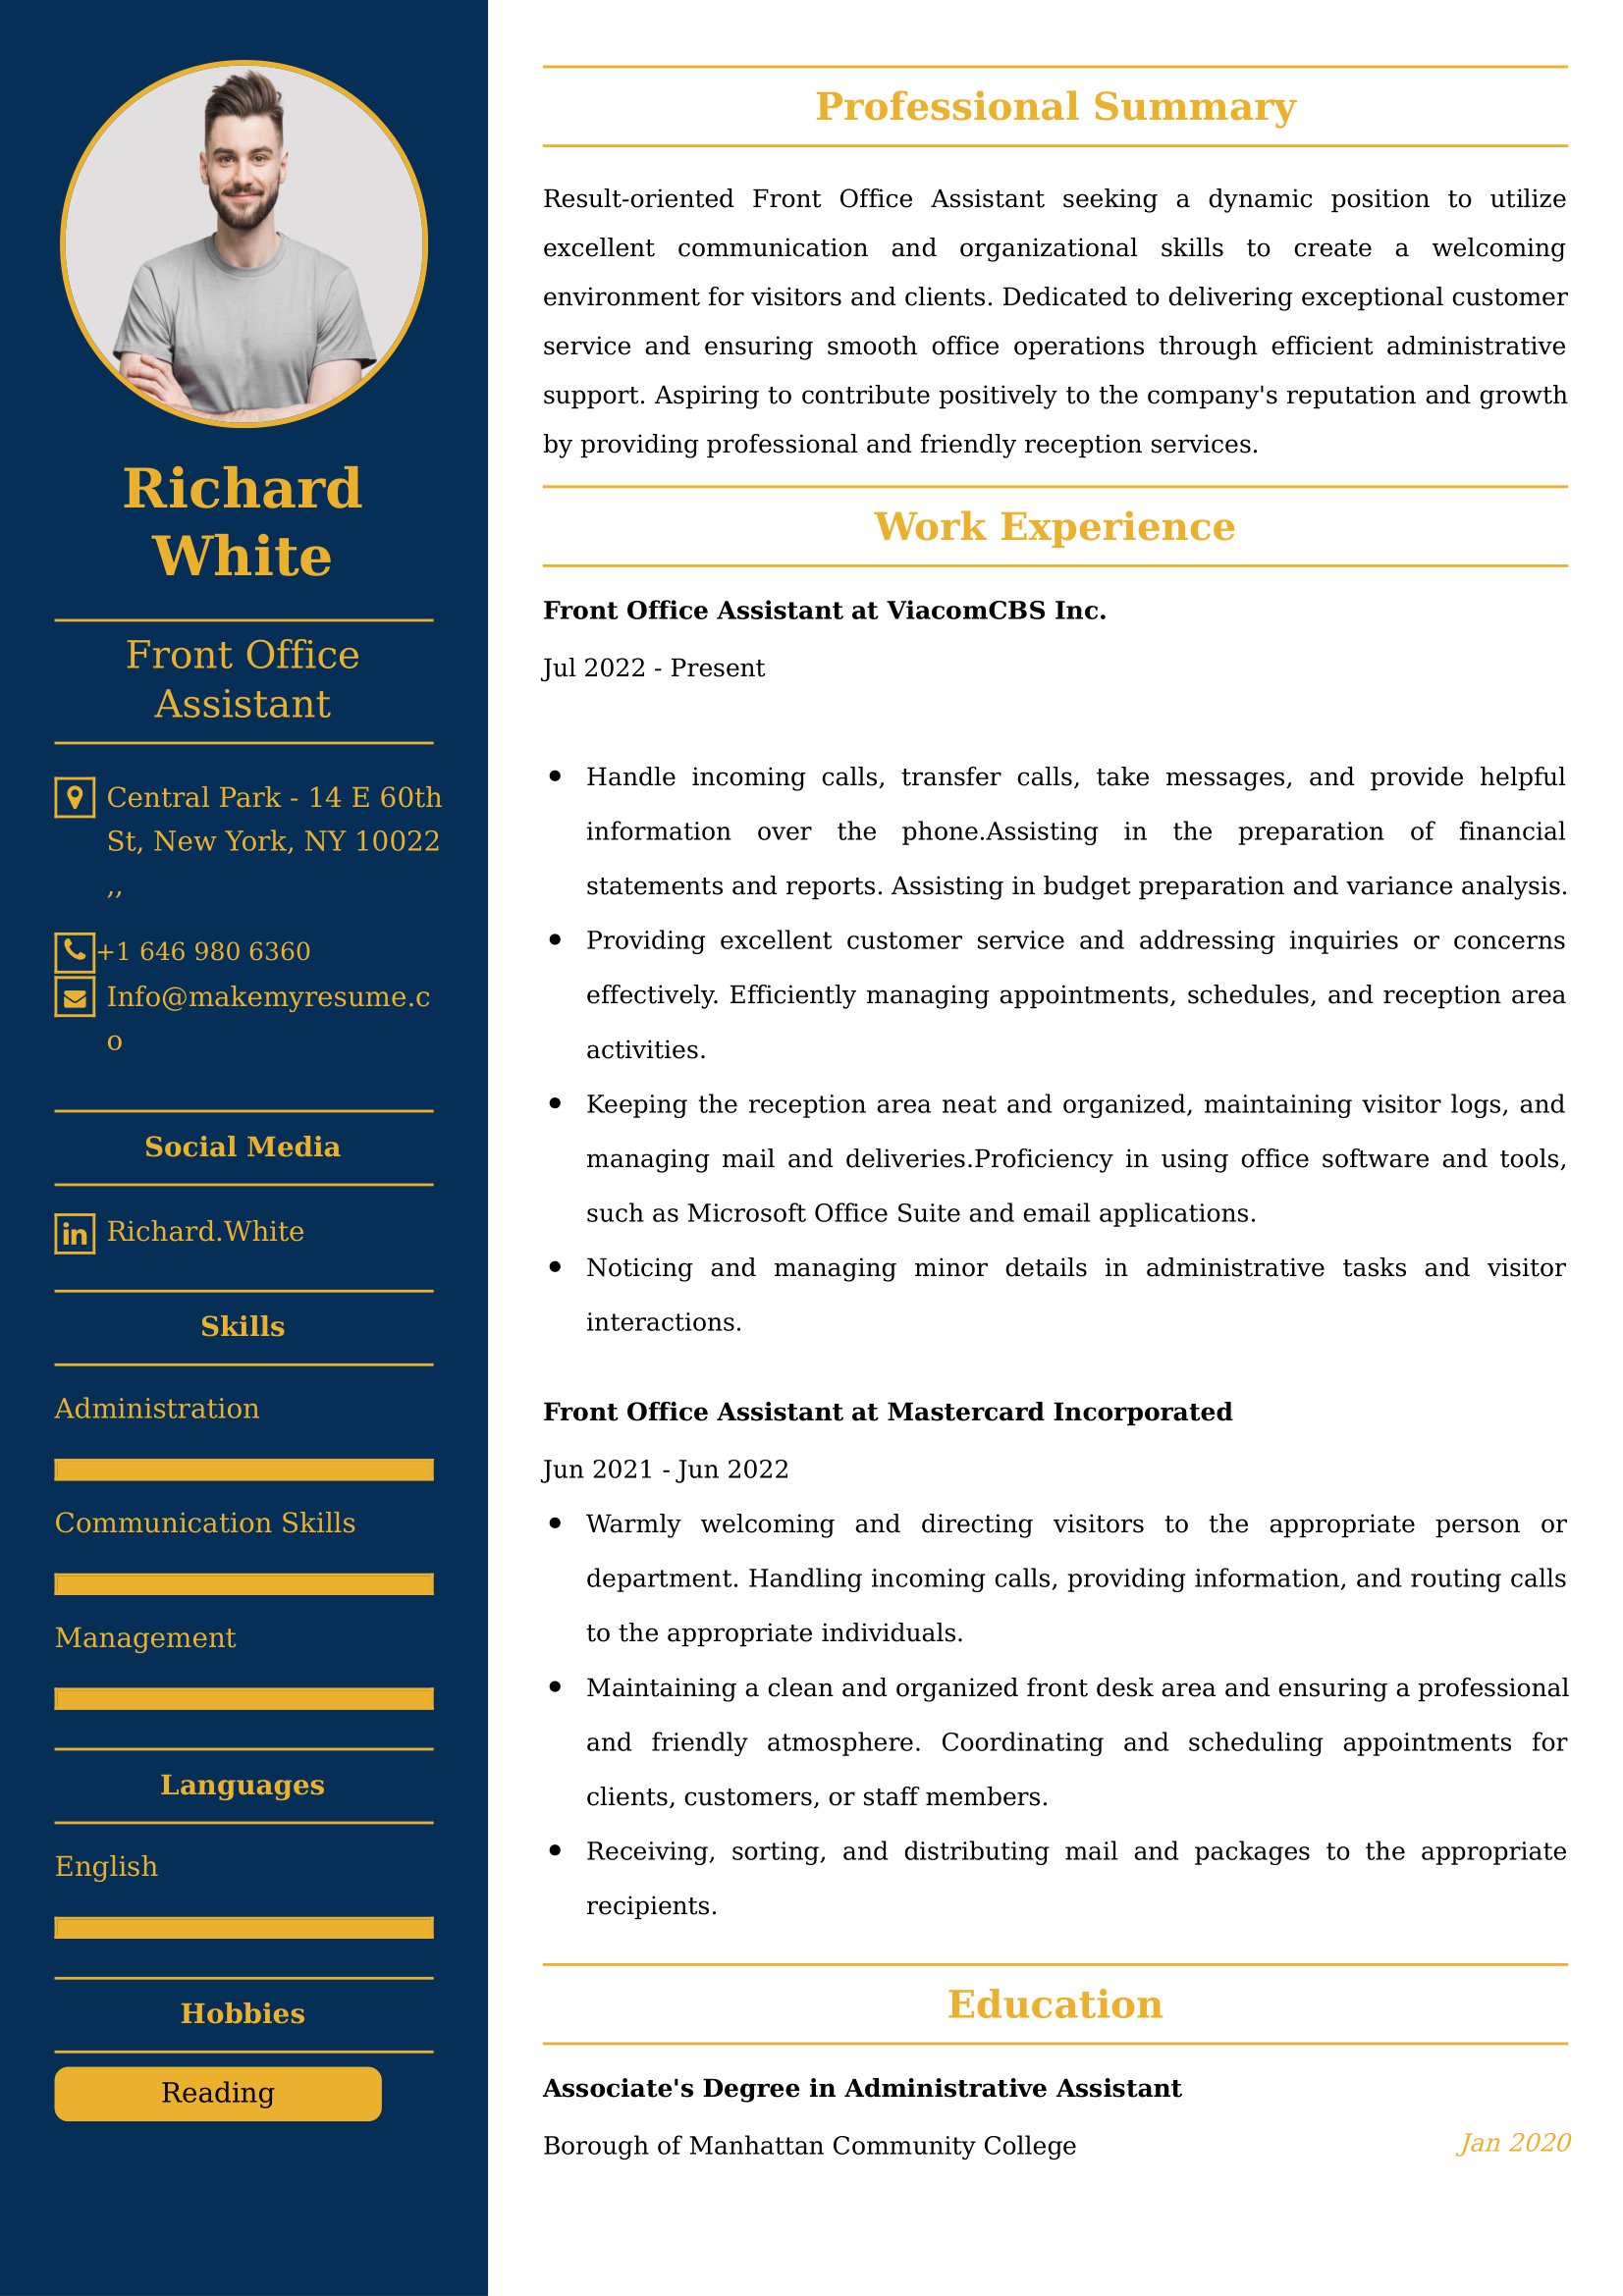 Front Office Assistant Resume Examples - Brazilian Format, Latest Template